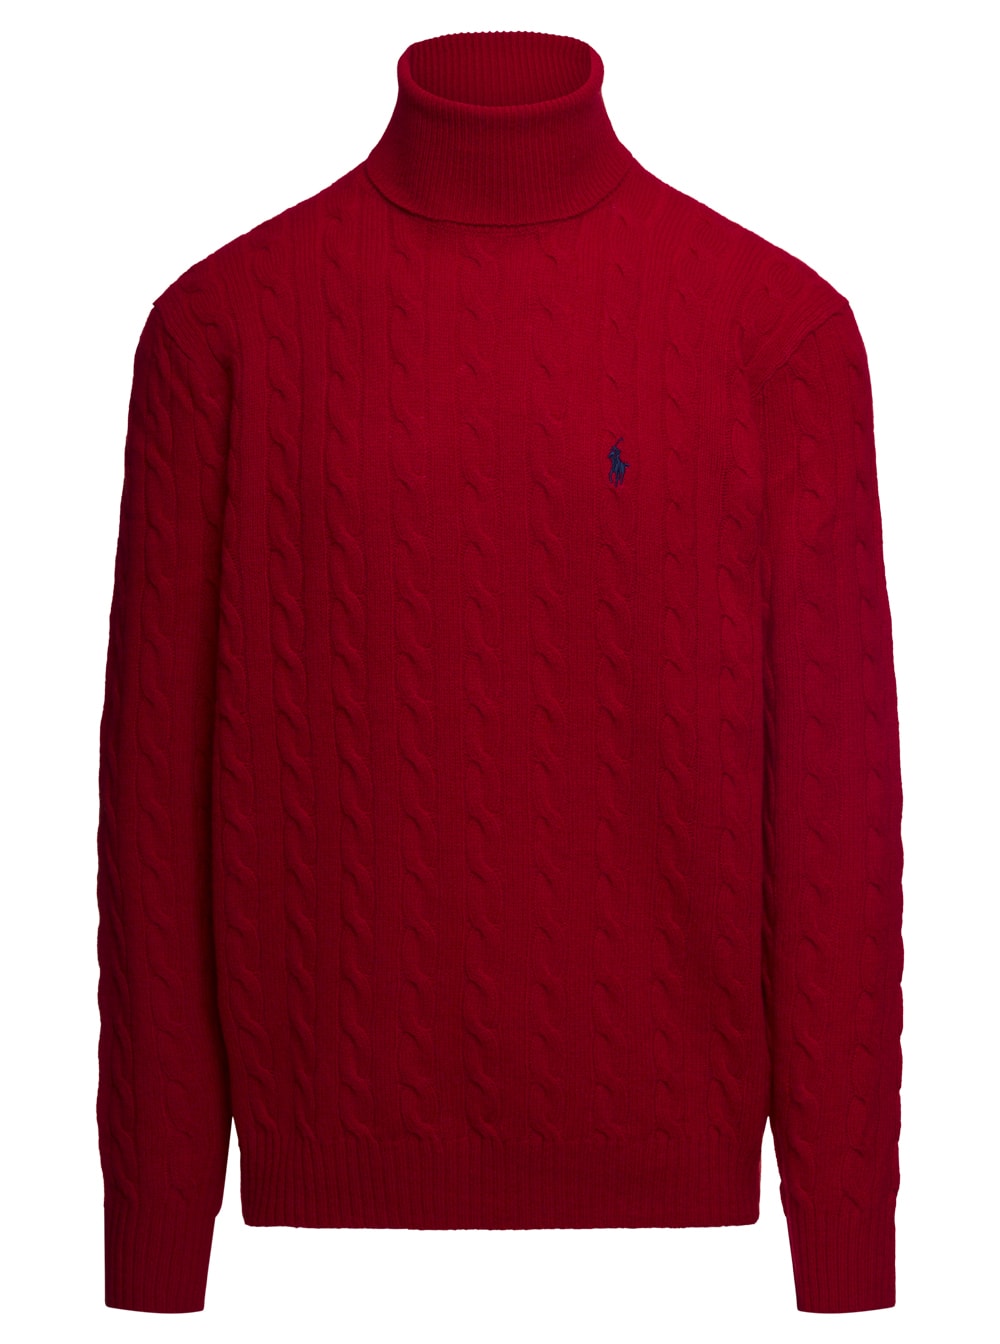 Red Turtleneck In Cable Wool And Cashmere Knit With Contrast Logo Embroidery On The Chest Polo Ralph Lauren Man